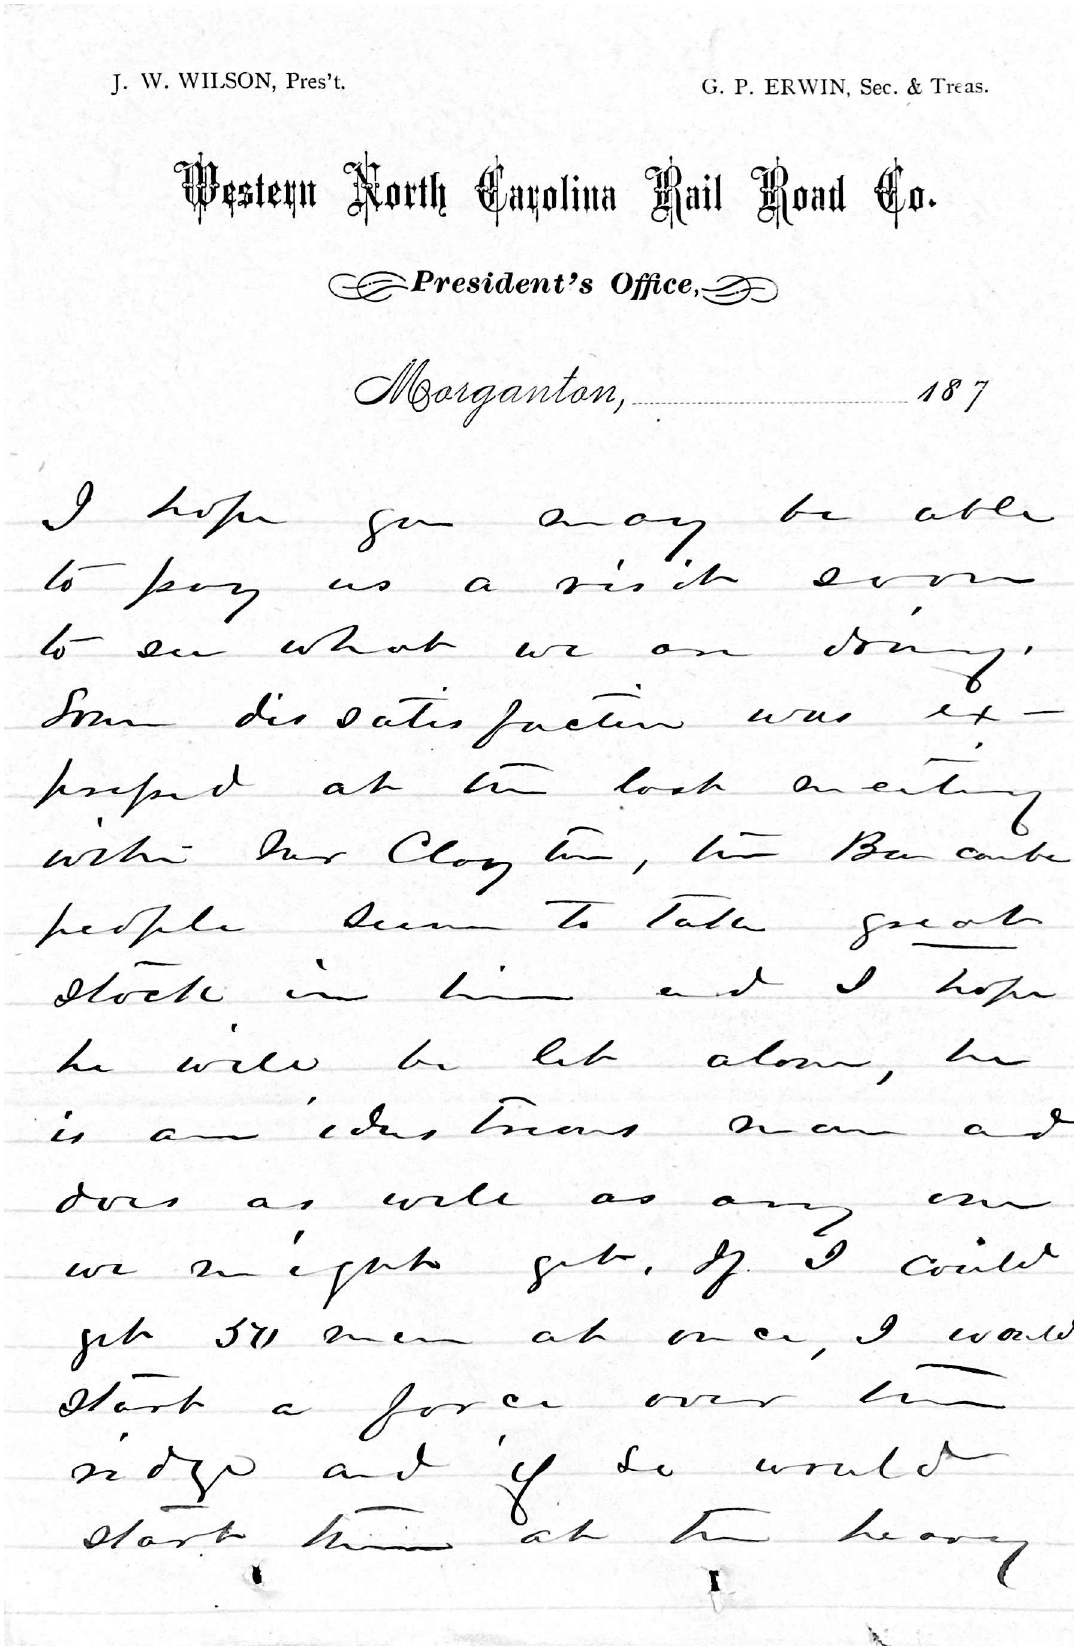 JWW to ZBV, 4 March 1878 p 3